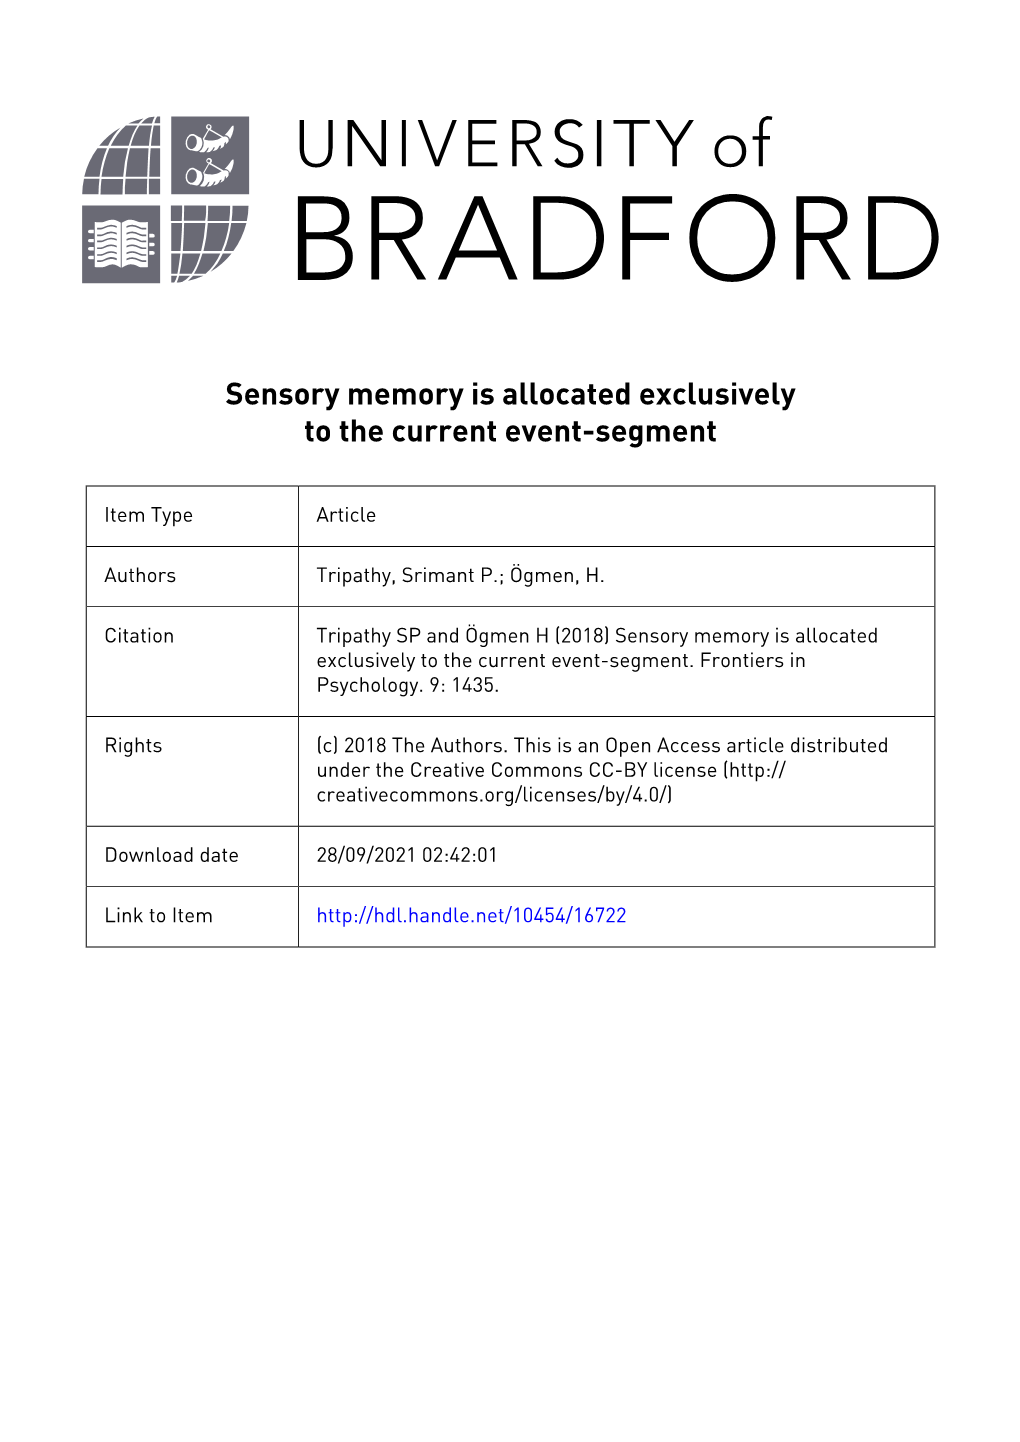 Sensory Memory Is Allocated Exclusively to the Current Event-Segment